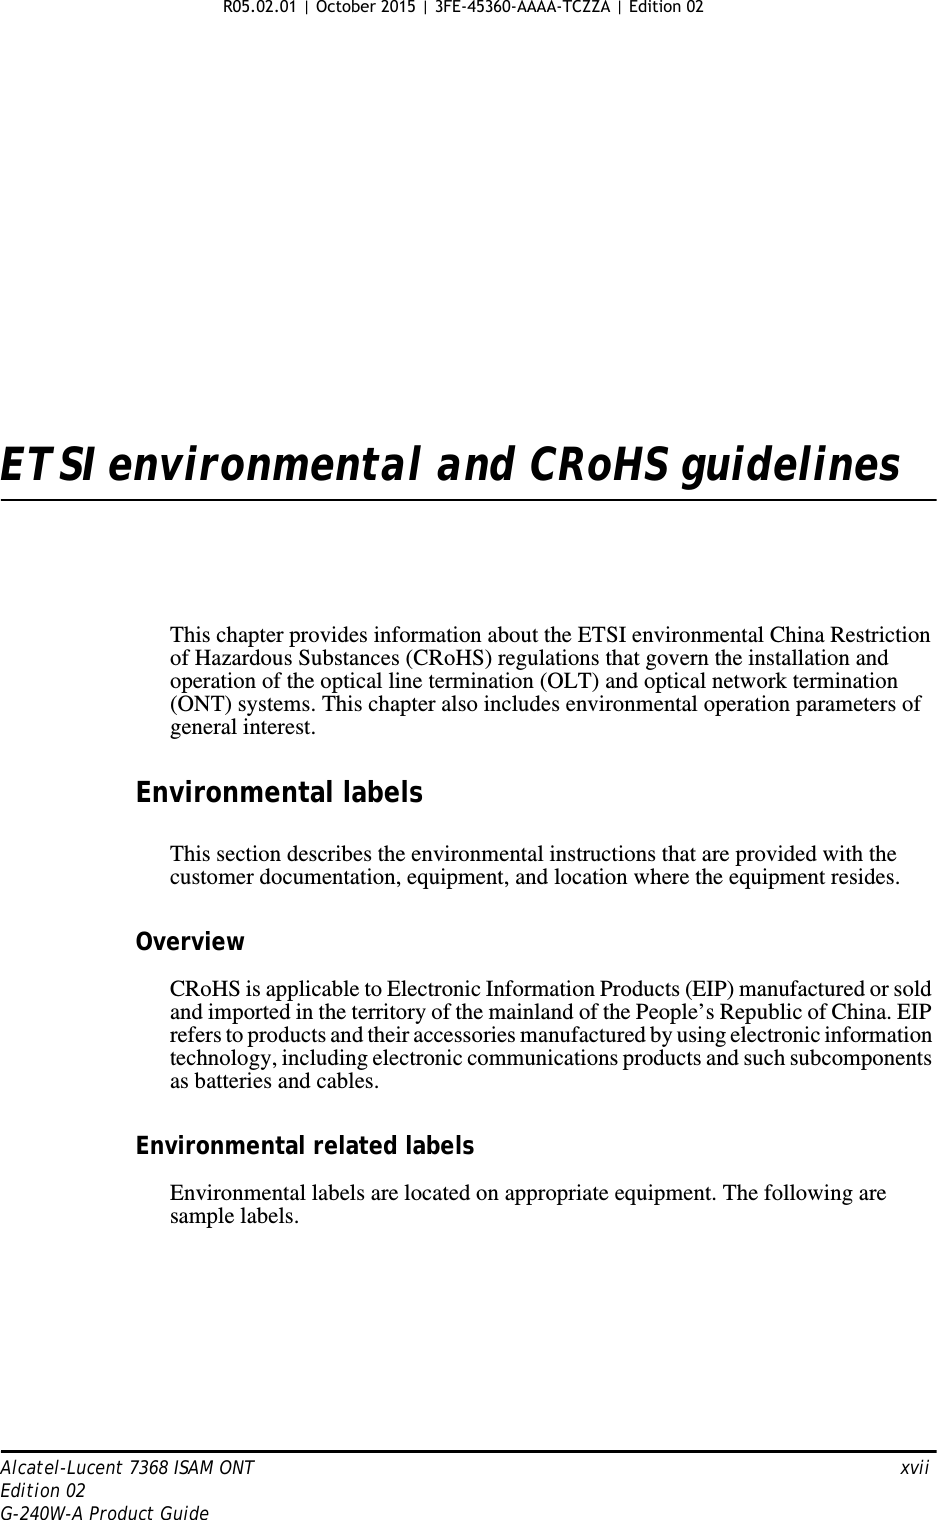 Alcatel-Lucent 7368 ISAM ONT   xviiEdition 02G-240W-A Product GuideETSI environmental and CRoHS guidelinesThis chapter provides information about the ETSI environmental China Restriction of Hazardous Substances (CRoHS) regulations that govern the installation and operation of the optical line termination (OLT) and optical network termination (ONT) systems. This chapter also includes environmental operation parameters of general interest.Environmental labelsThis section describes the environmental instructions that are provided with the customer documentation, equipment, and location where the equipment resides.OverviewCRoHS is applicable to Electronic Information Products (EIP) manufactured or sold and imported in the territory of the mainland of the People’s Republic of China. EIP refers to products and their accessories manufactured by using electronic information technology, including electronic communications products and such subcomponents as batteries and cables.Environmental related labelsEnvironmental labels are located on appropriate equipment. The following are sample labels. R05.02.01 | October 2015 | 3FE-45360-AAAA-TCZZA | Edition 02 